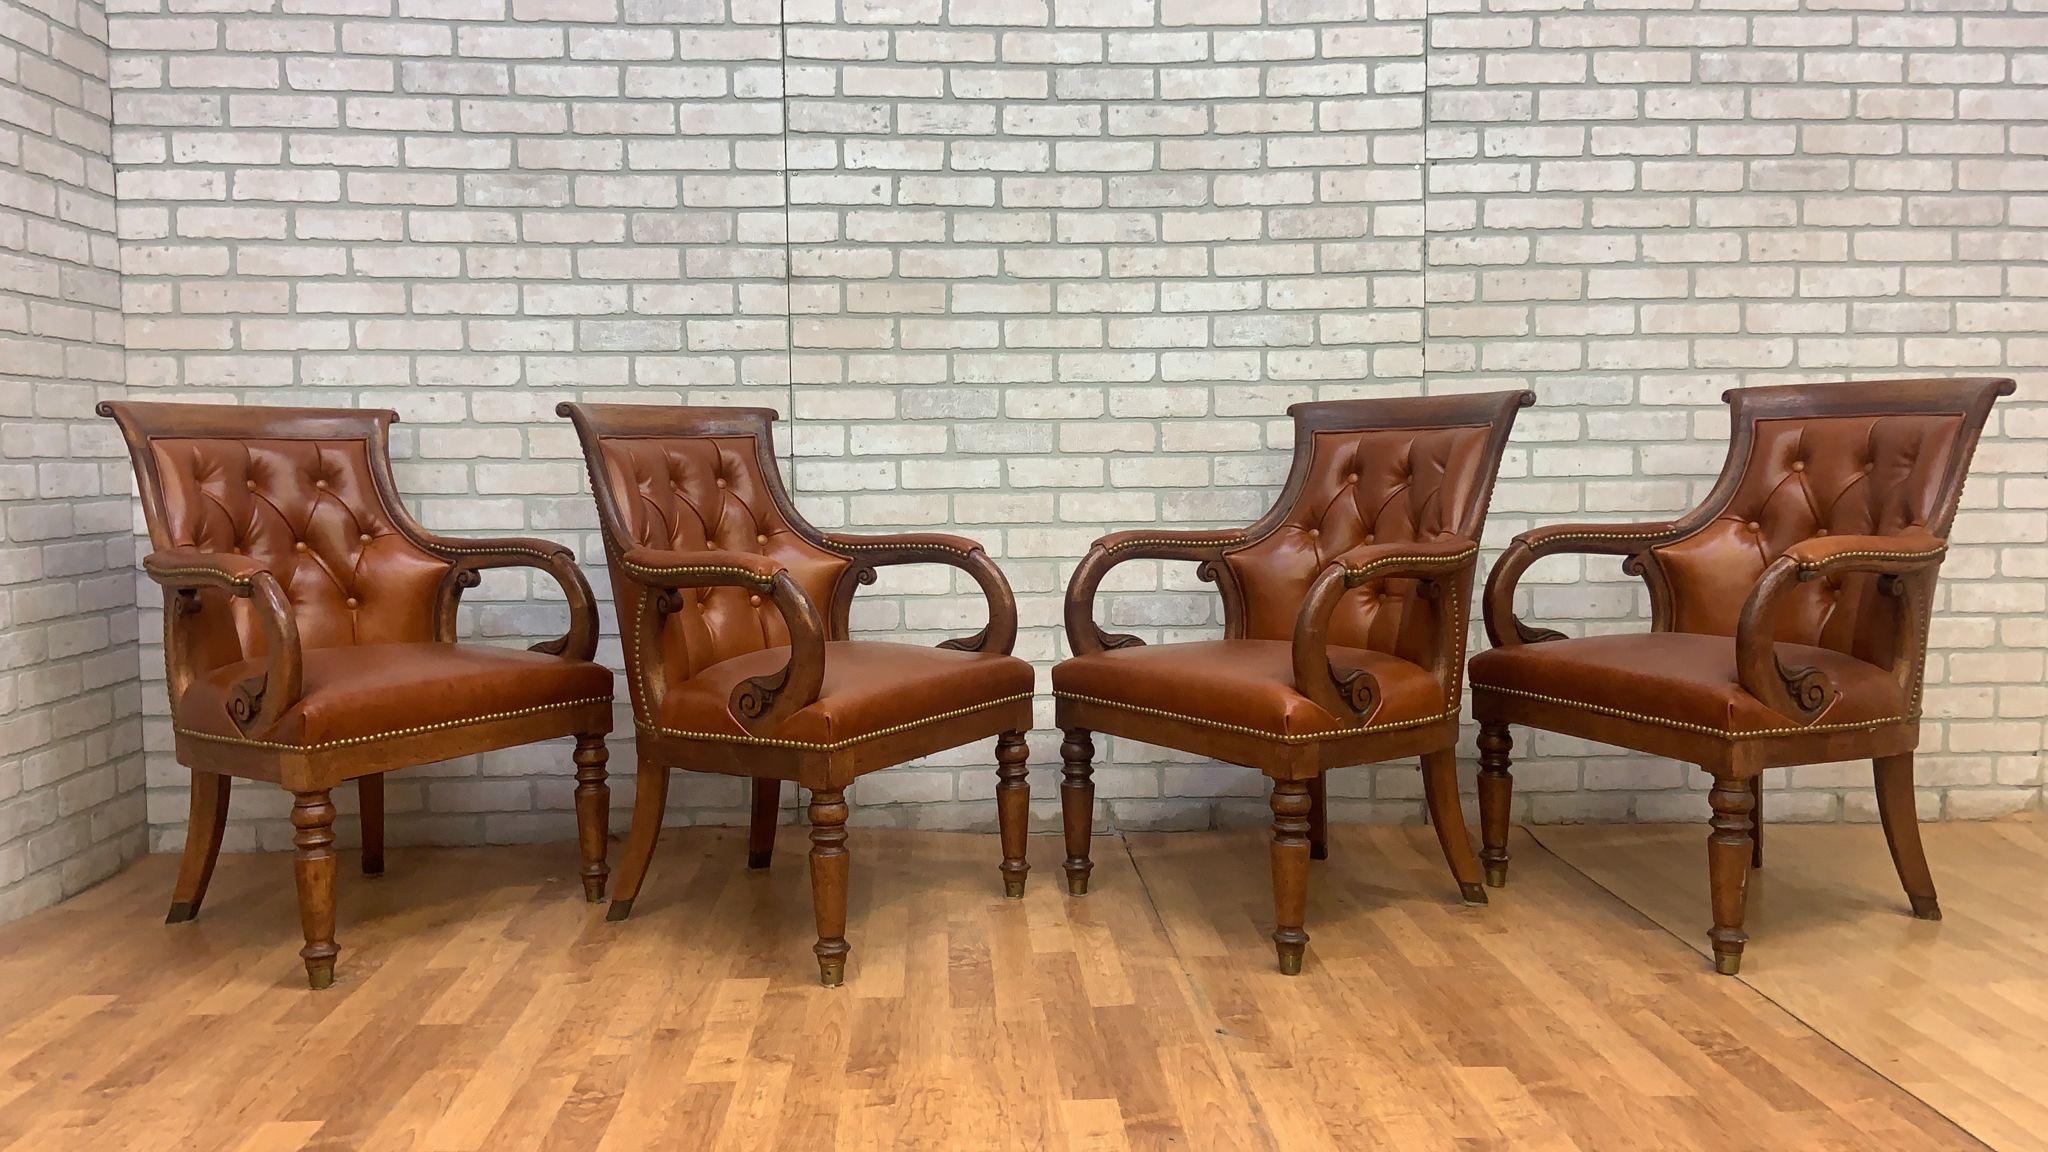 Vintage Hancock and Moore Tufted Jockey Club Chair Newly Upholstered - Set of 4 3